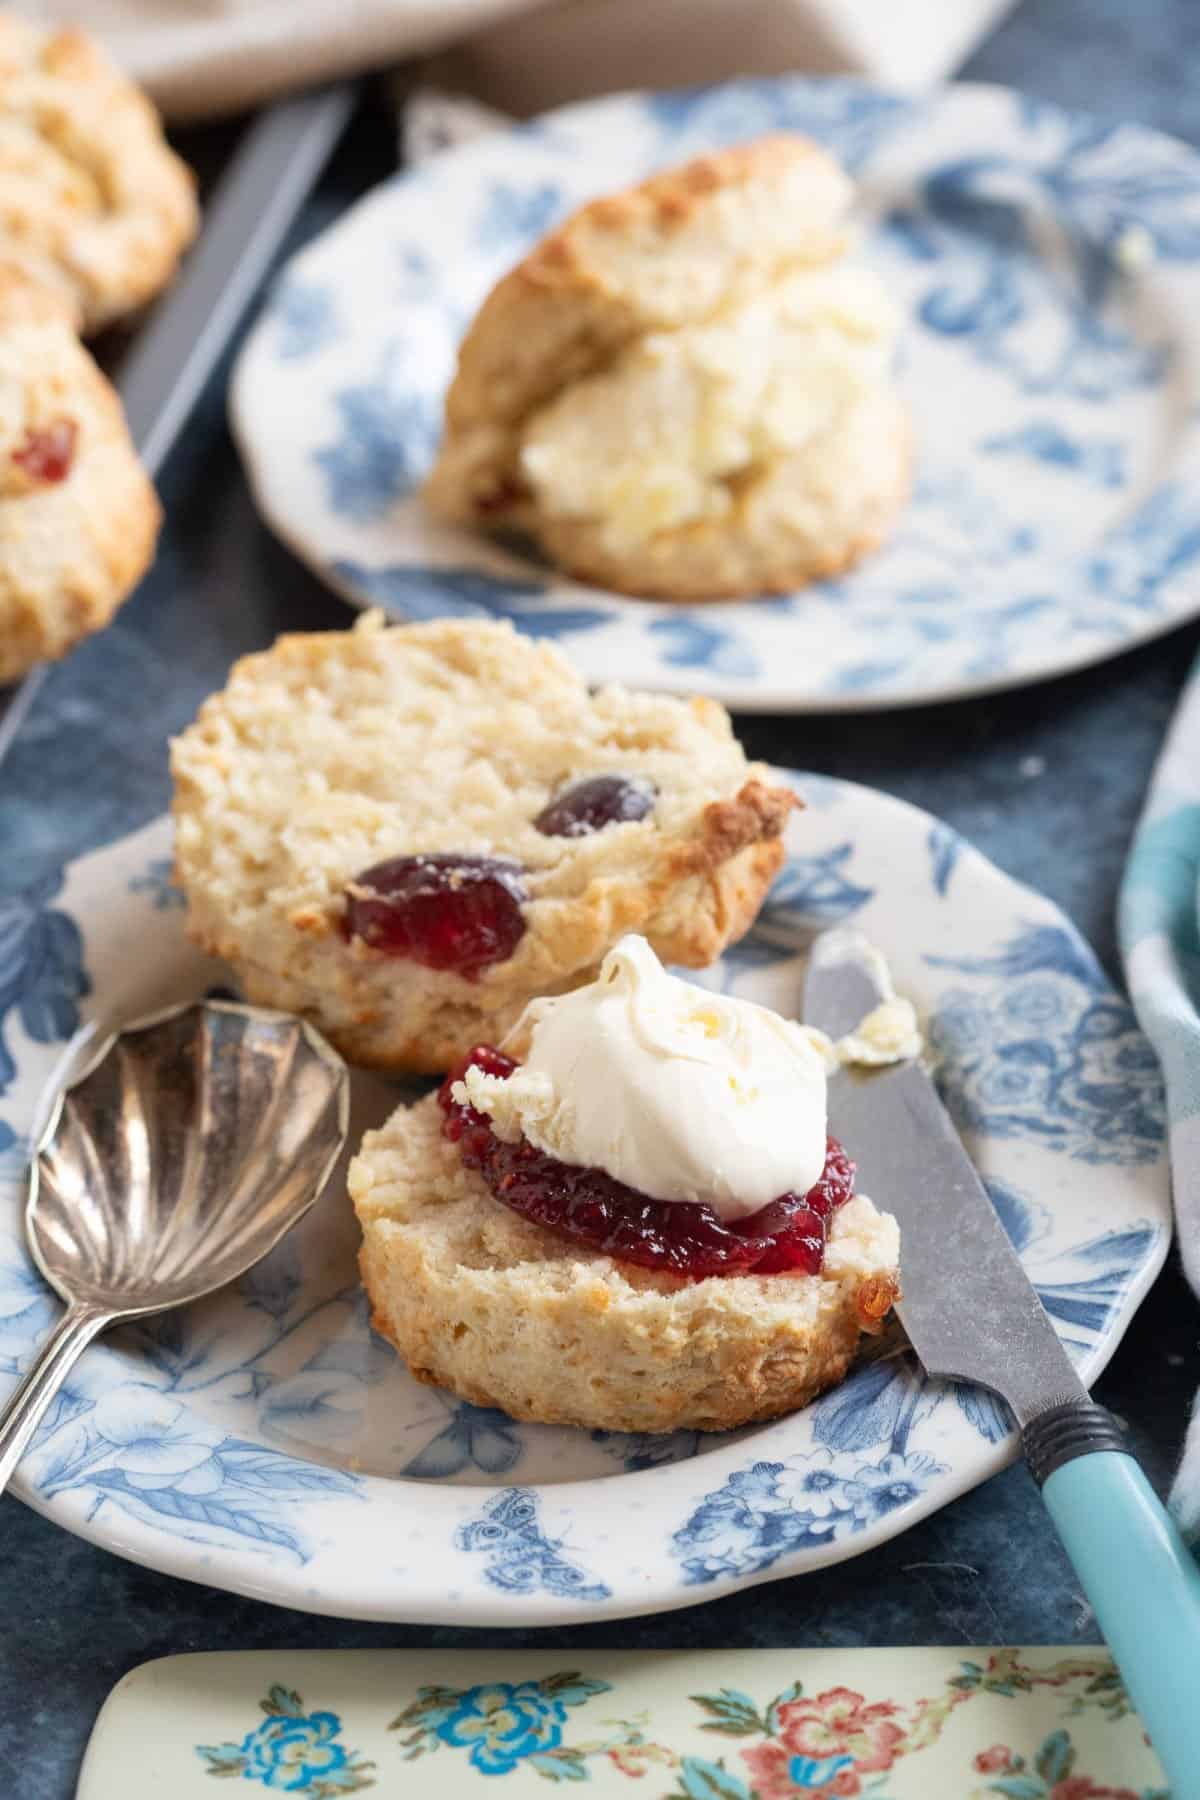 Cherry and almond scone on a tea plate served with jam and clotted cream.